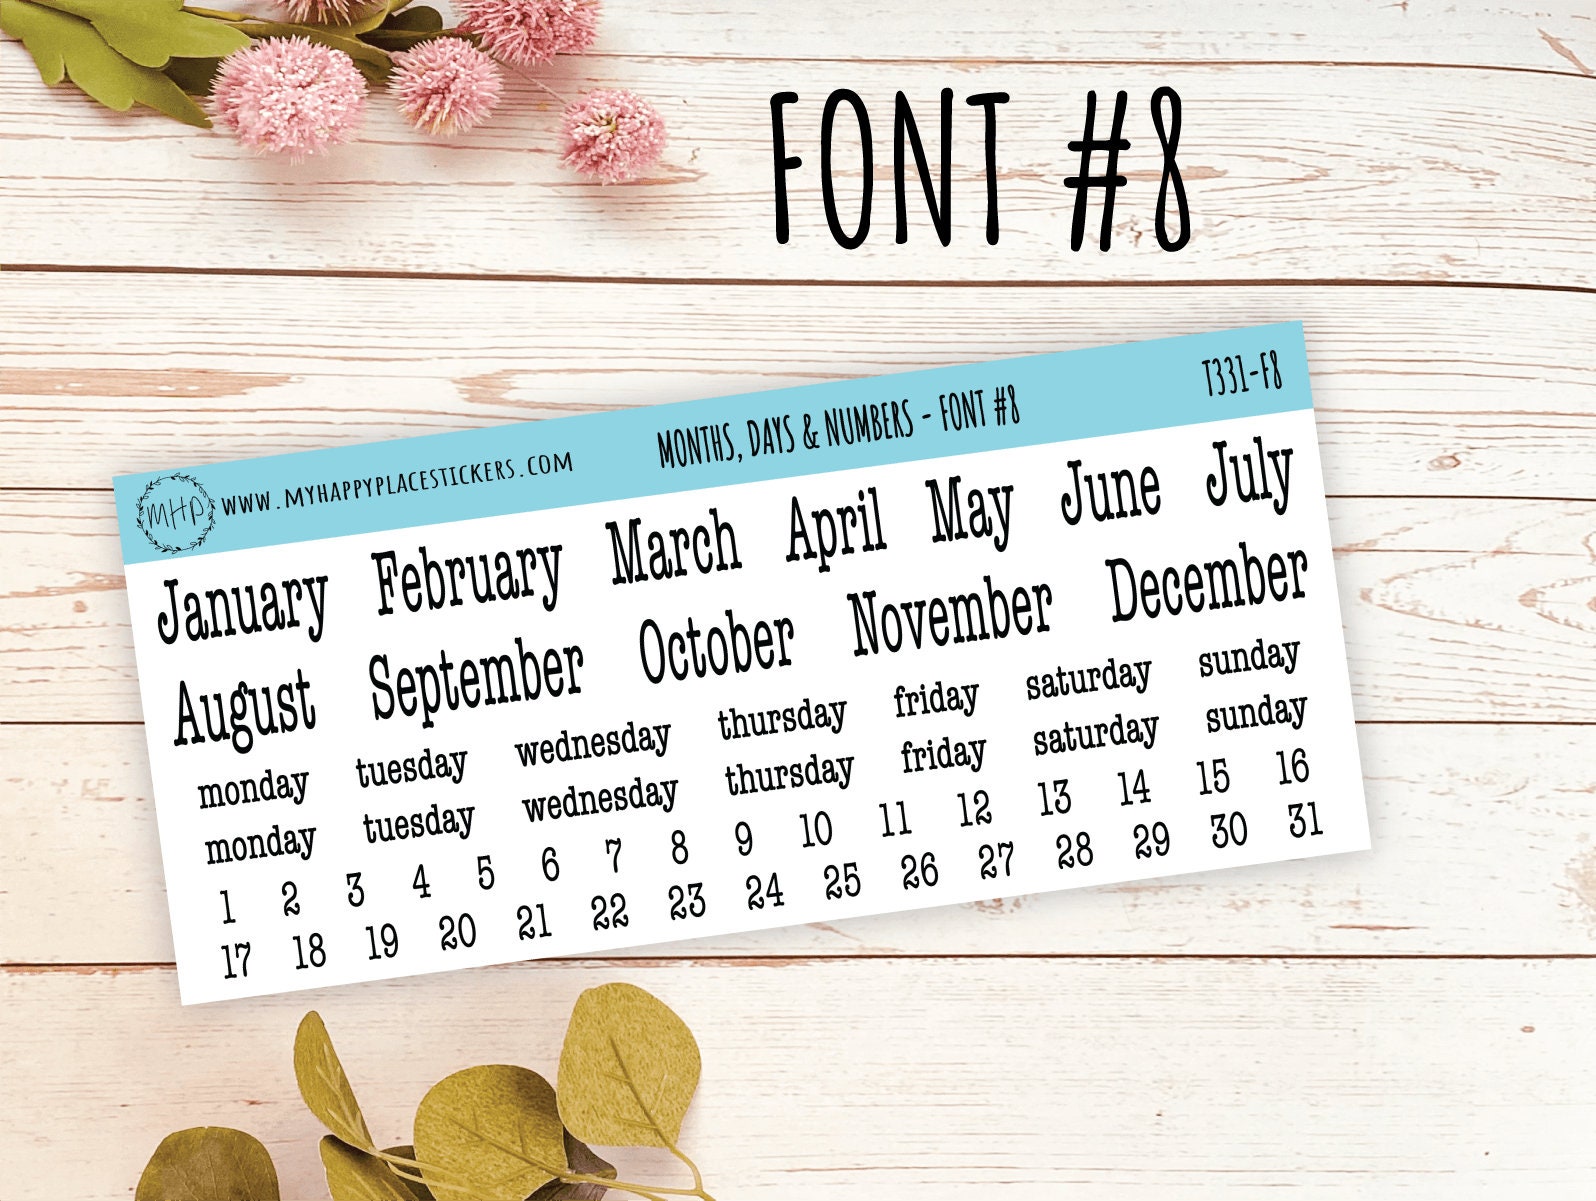 Small Date Number Stickers for Planners, Organizers and Bullet Journals.  Undated Planners. 8 Fonts to Choose From Q114 